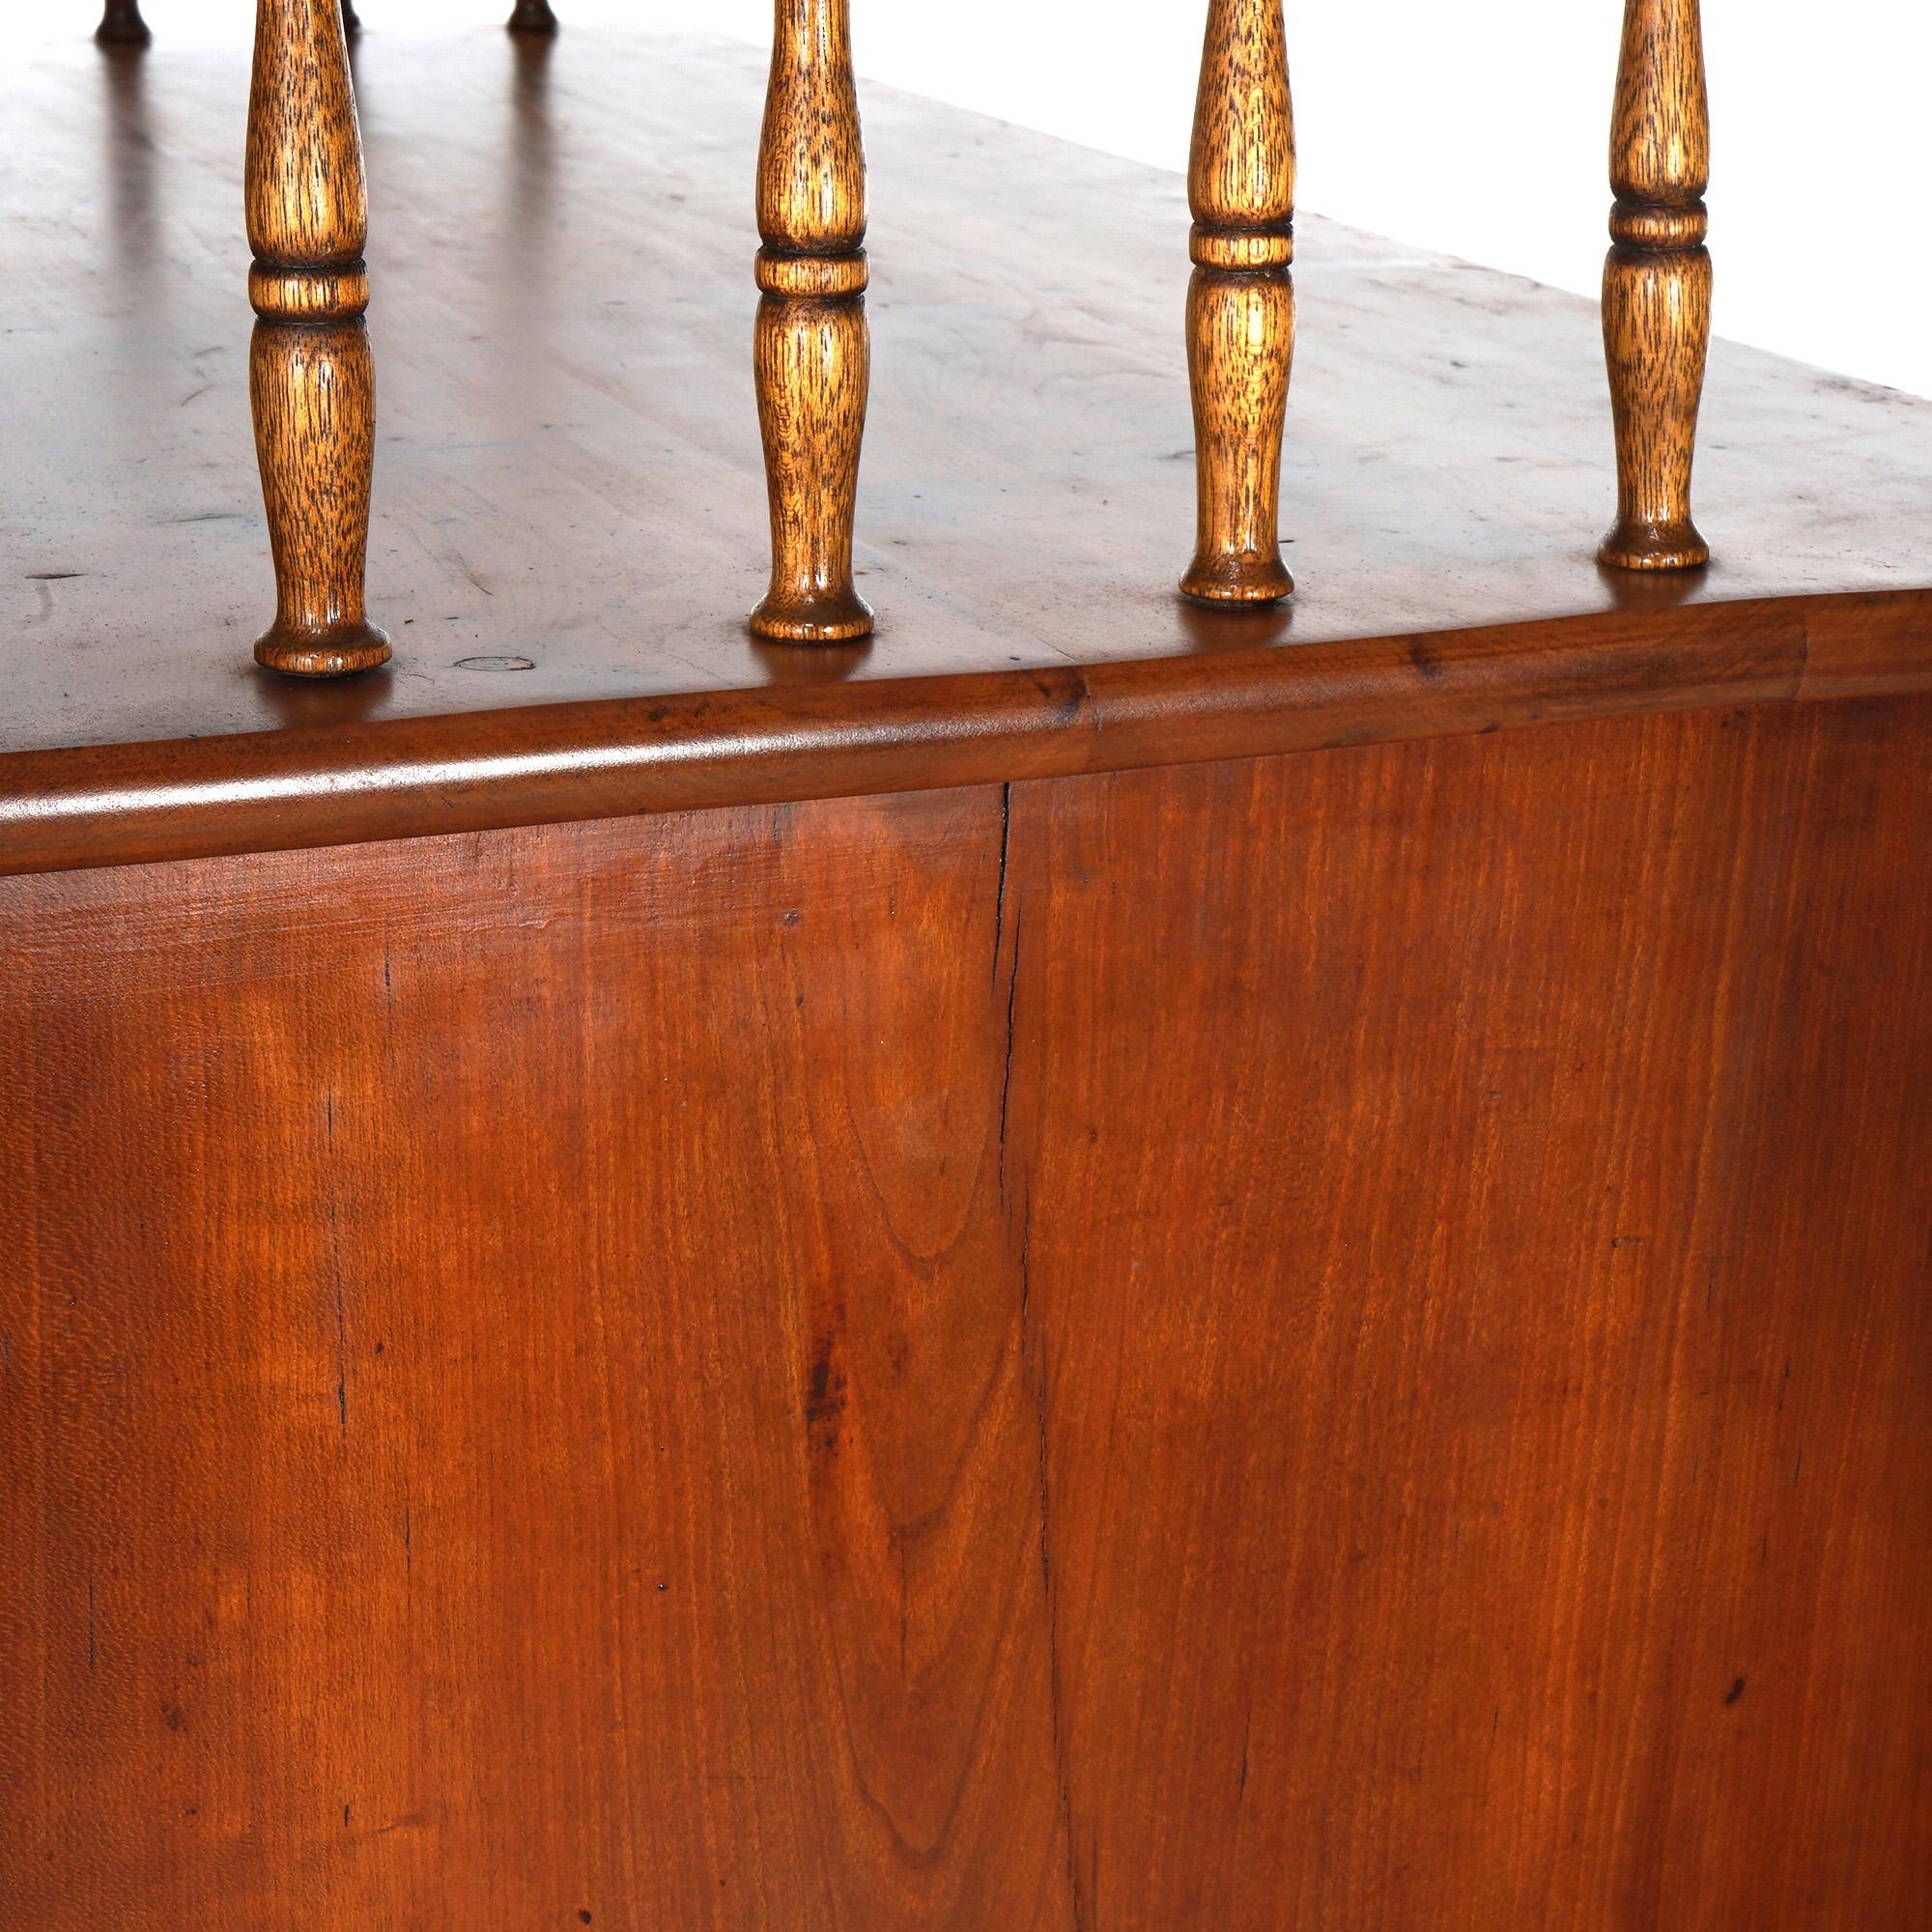 Antique Classical Empire Mahogany Gentlemans Chest with Gallery Backsplash 19thC For Sale 14